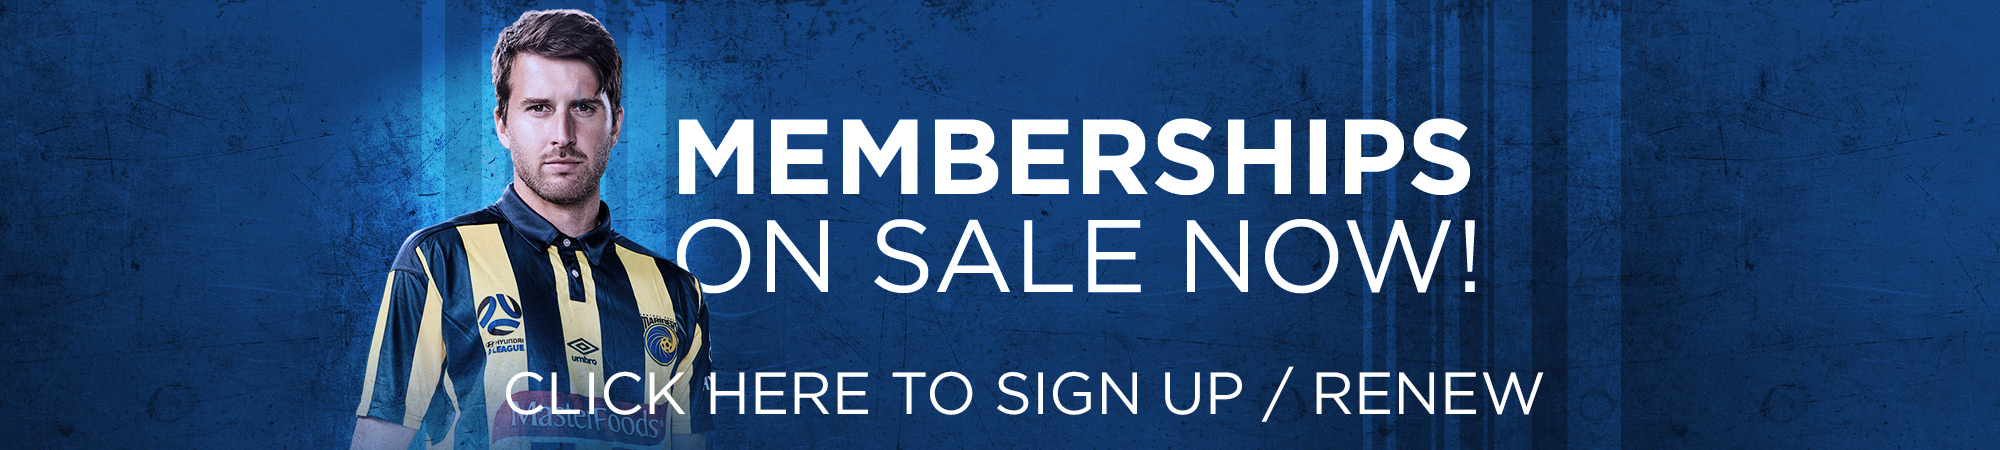 Updated 2018-19 Memberships On Sale banner with Antony Golec 